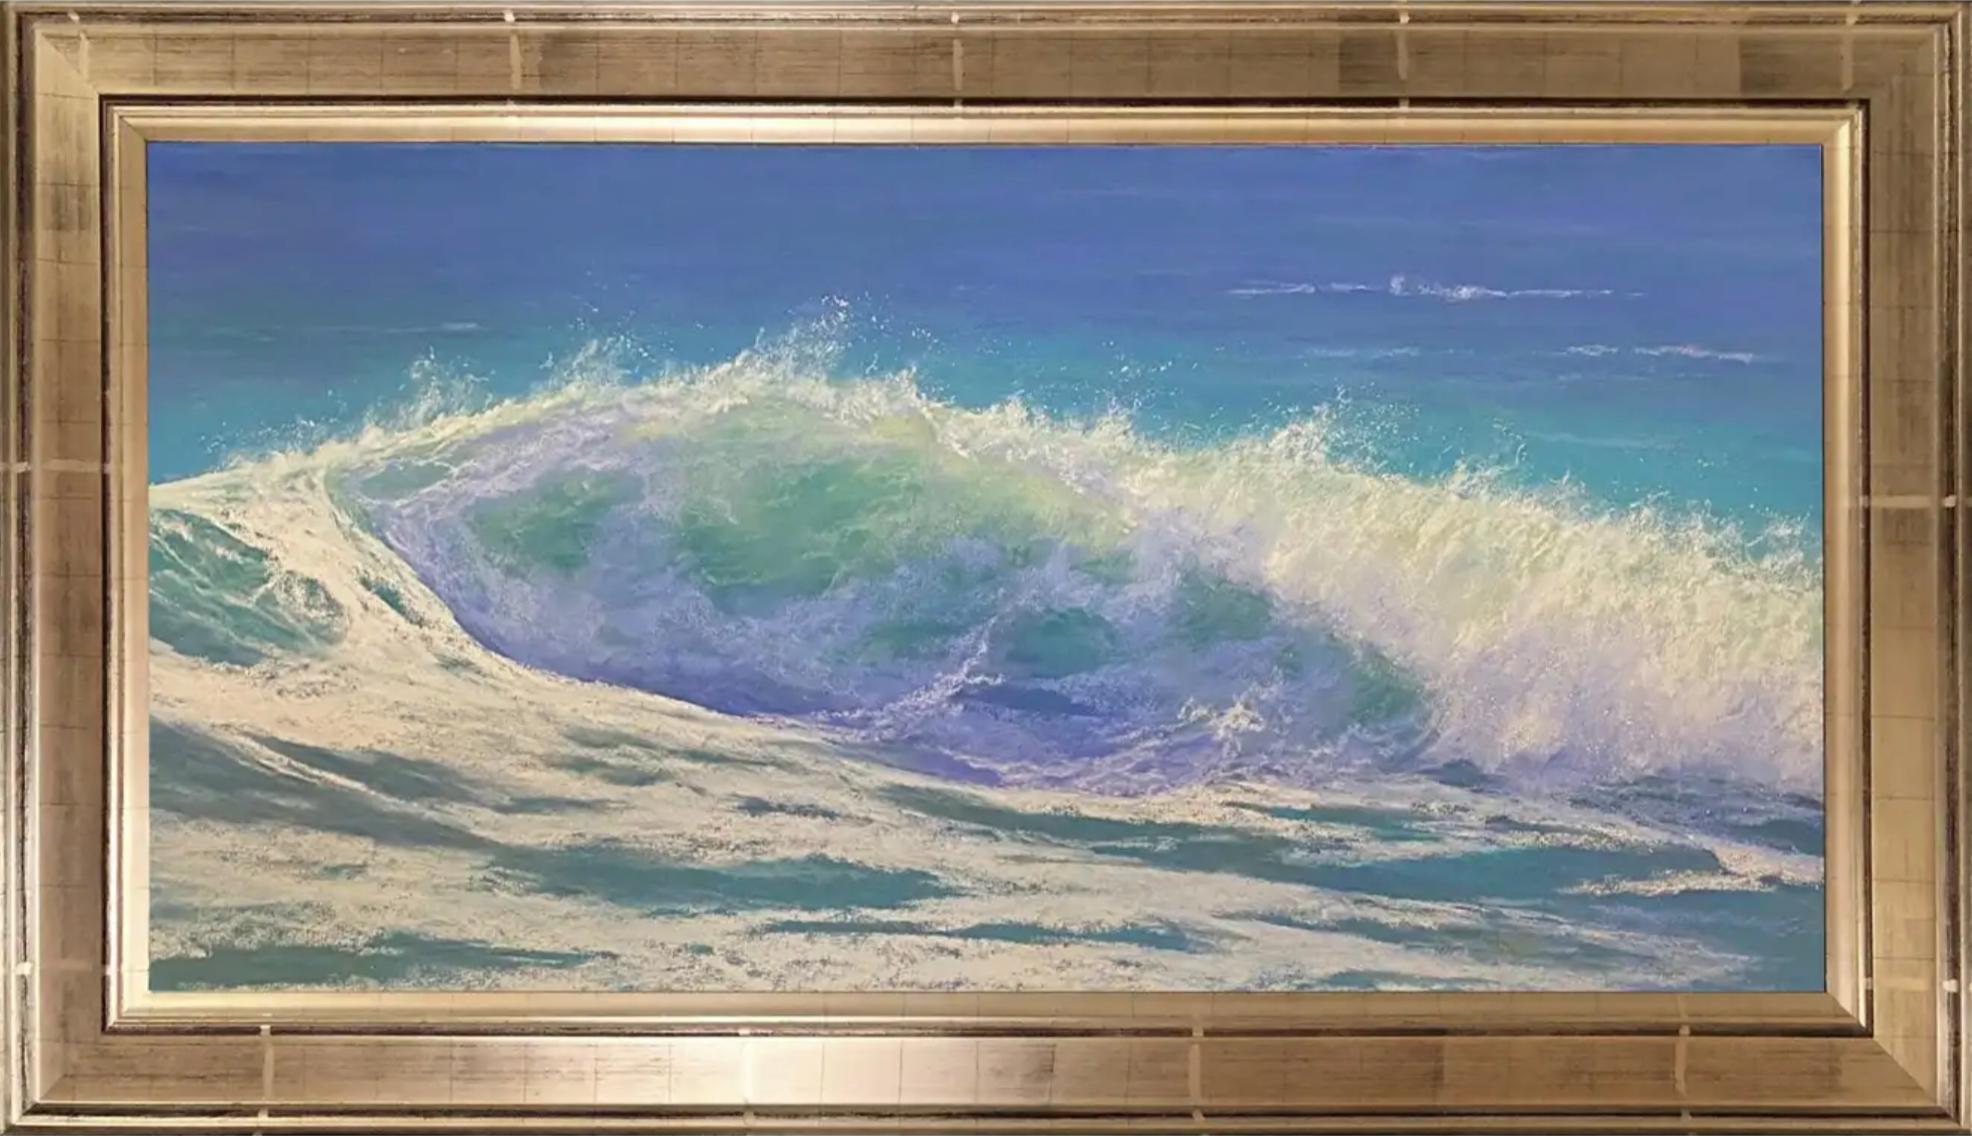 Warm Water, Framed Original Impressionist Seascape Pastel Painting on Paper